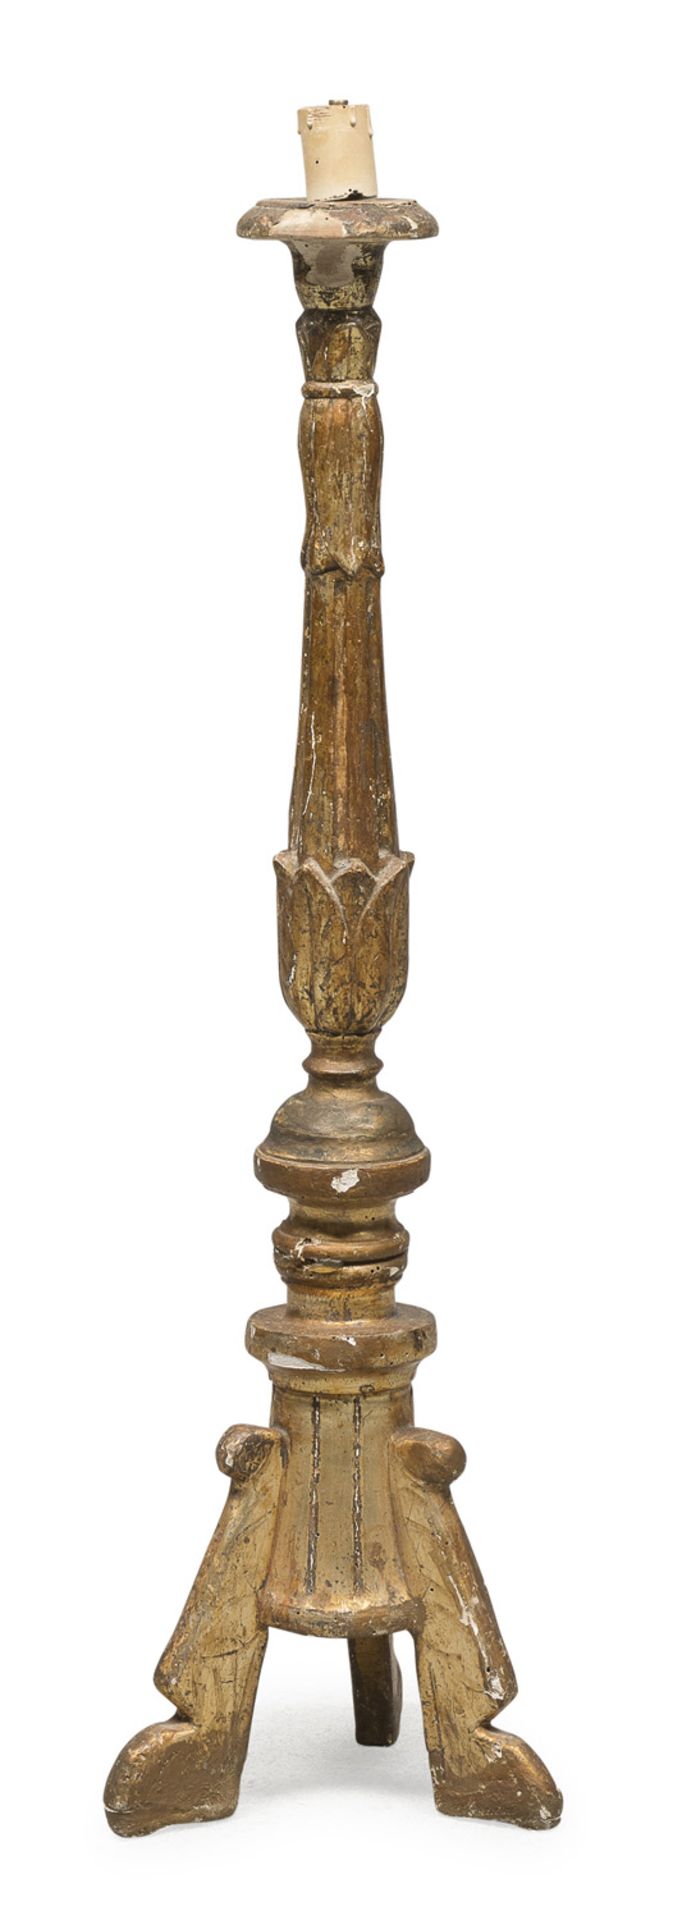 CANDLESTICK IN GILTWOOD LATE 18th CENTURY